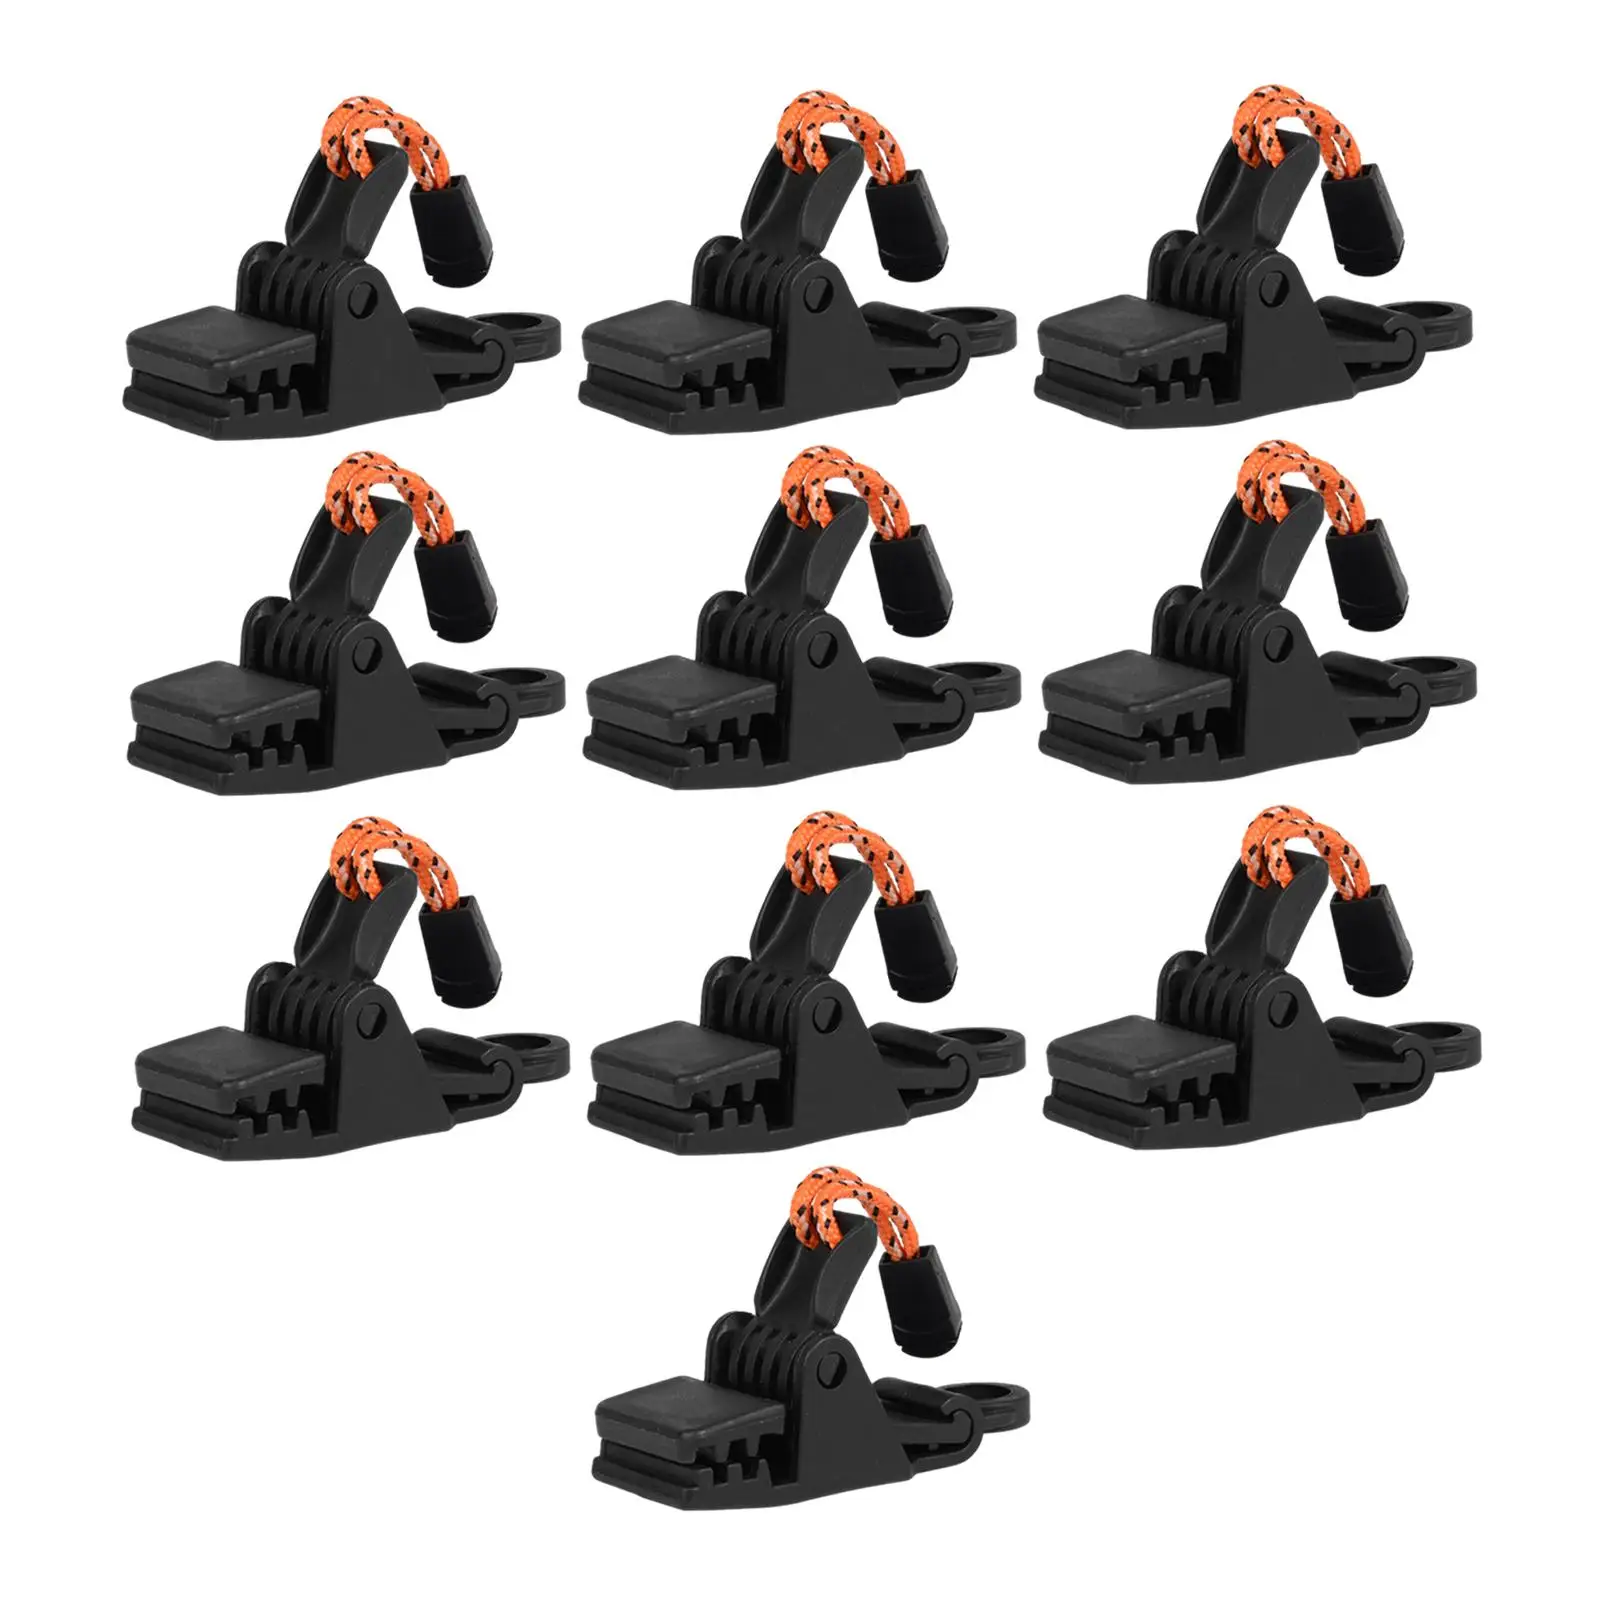 10x Tarp Clips Portable Sturdy Awning Clamps for Boat Cover Fixing Canopies